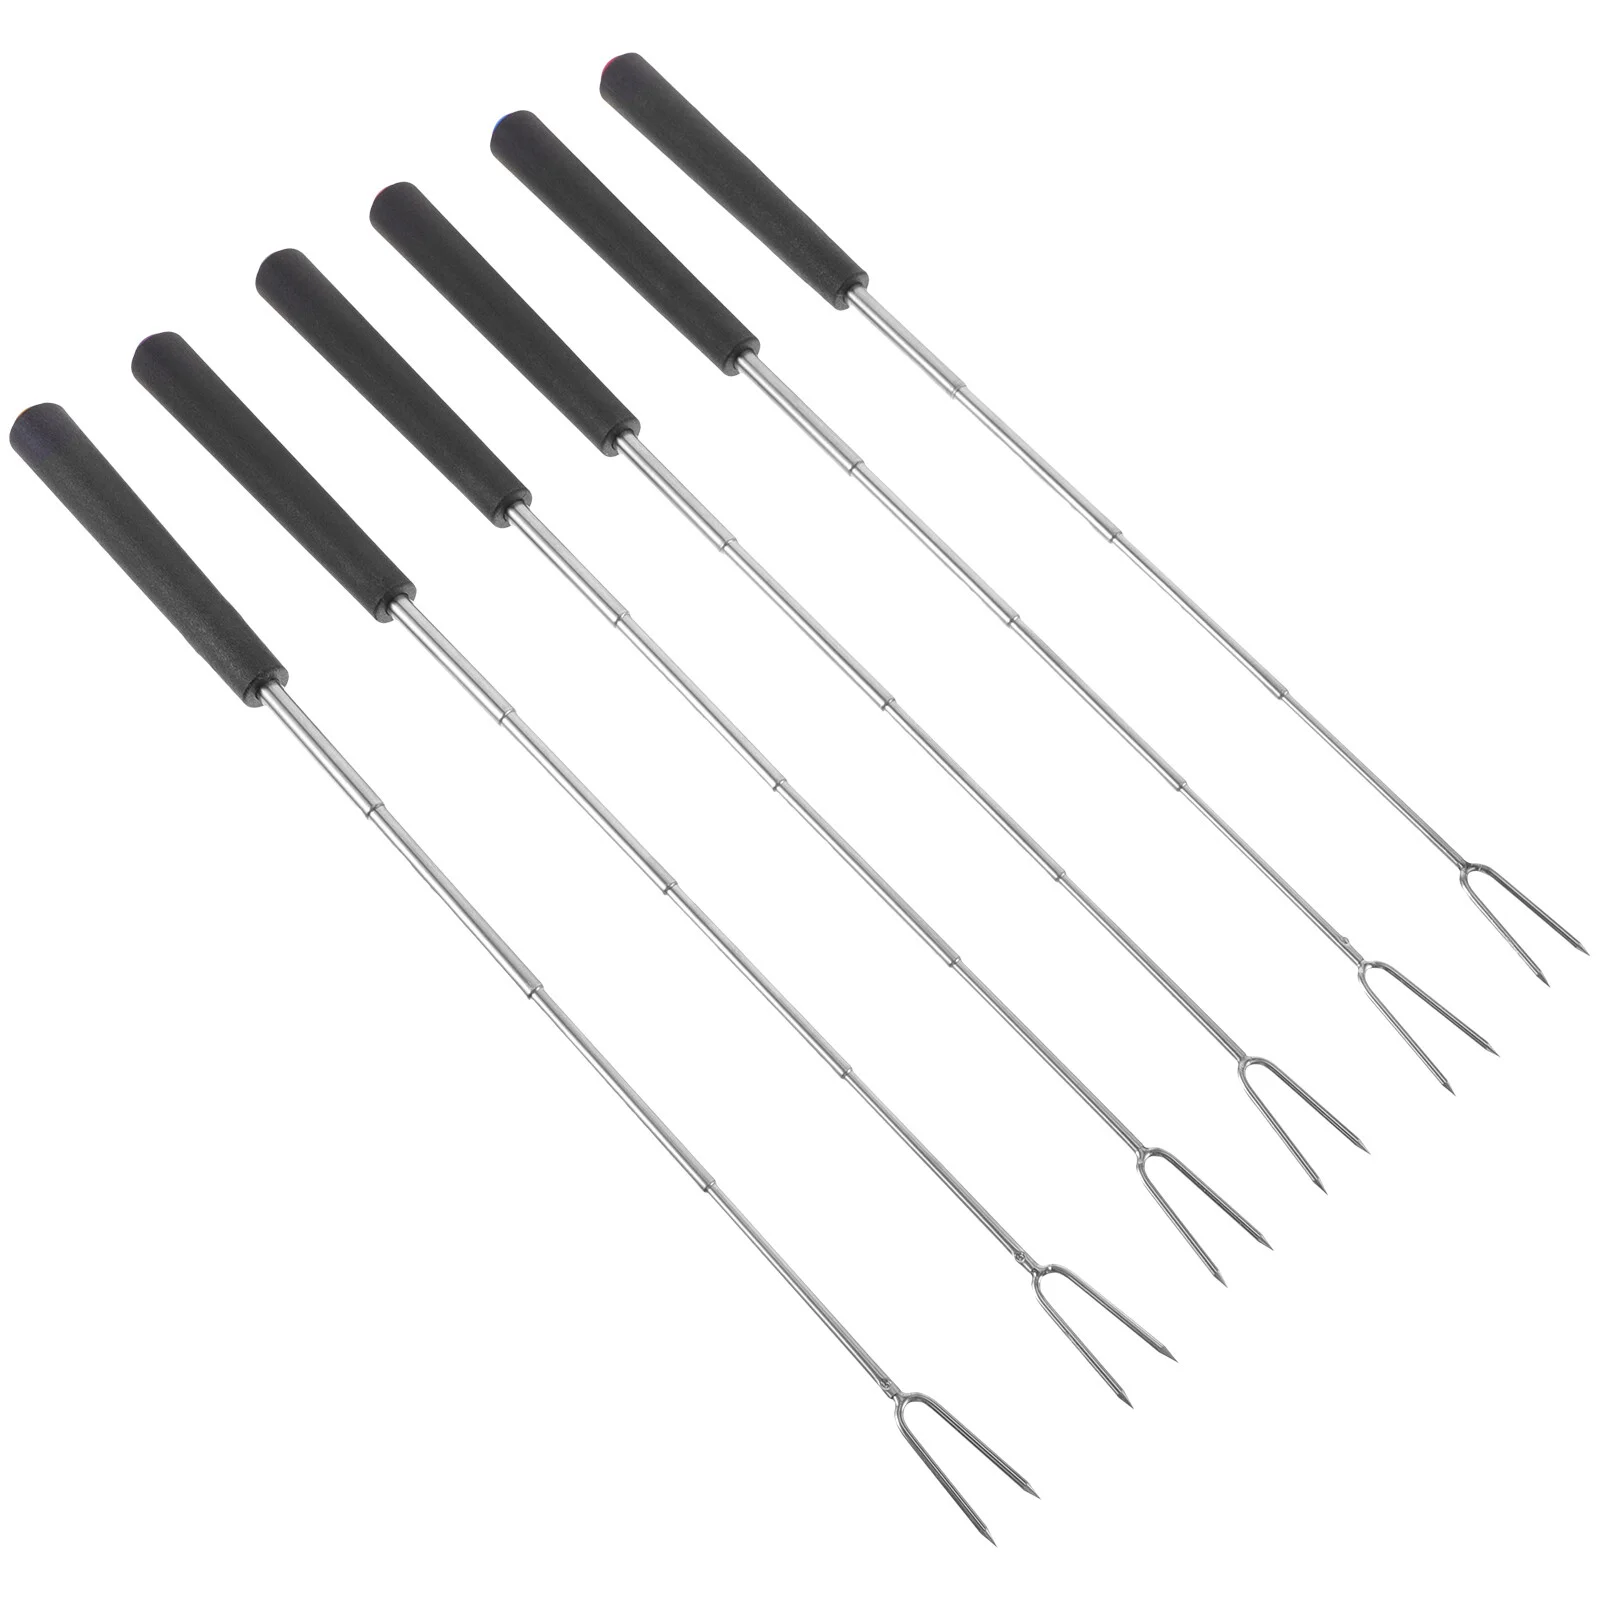 

6 Pcs Telescopic Fork Outdoor Bbq Grill Skewers Barbecue Tool Meat Forks Stainless Steel U-shaped Abs Grilling